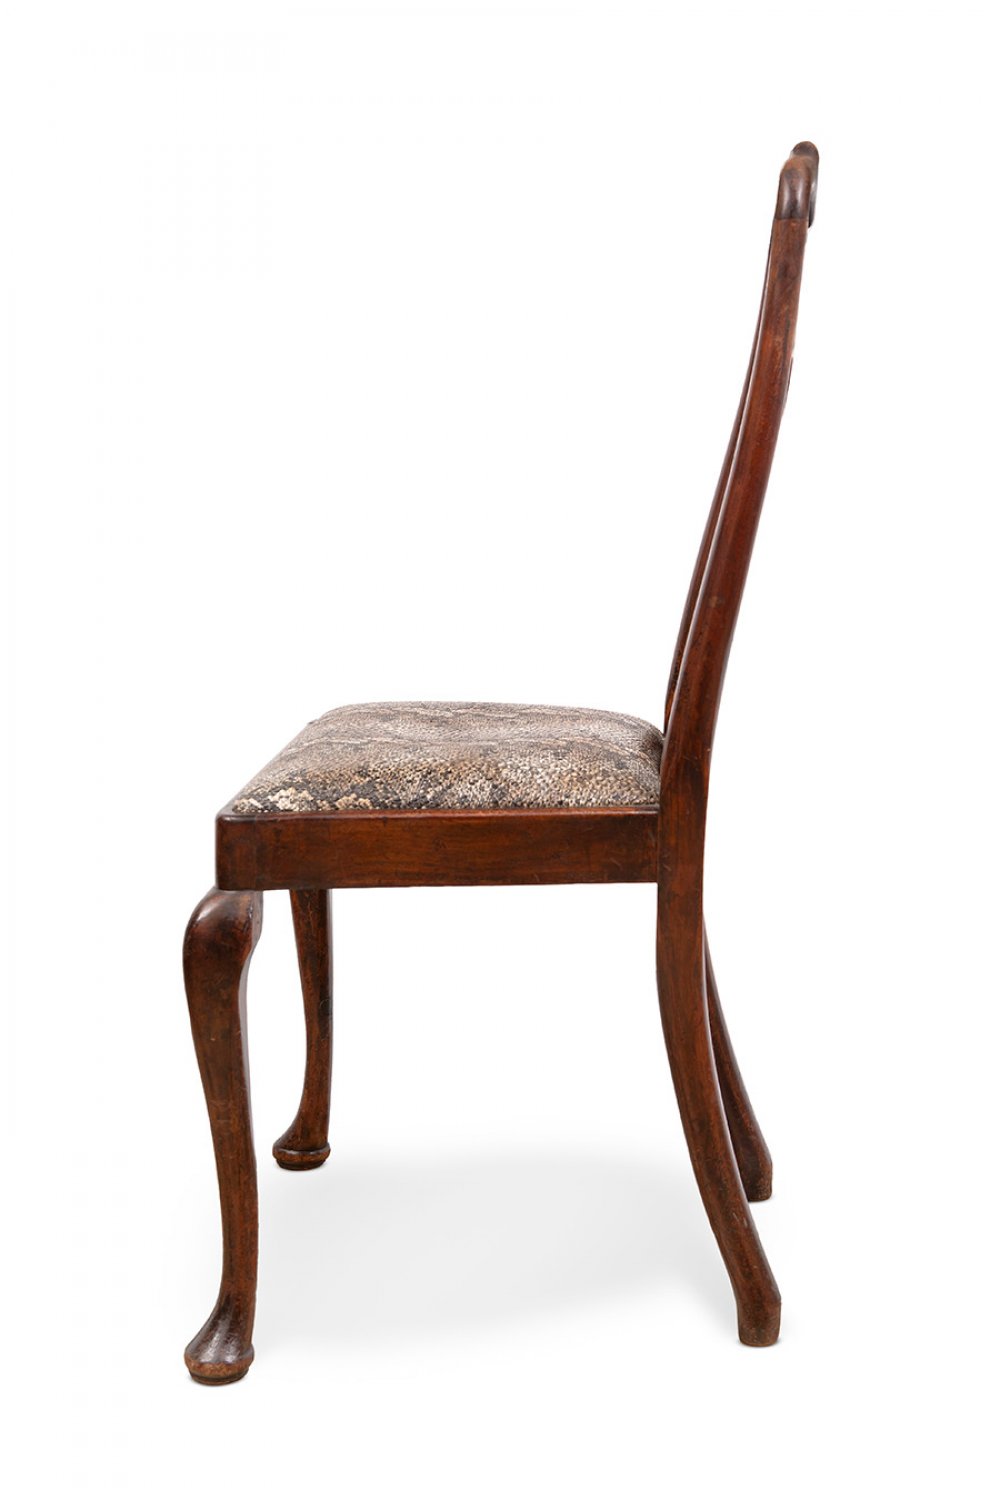 Six American Chippendale style dining table chairs, 19th century.Mahogany wood. Imitation boa skin - Image 6 of 7